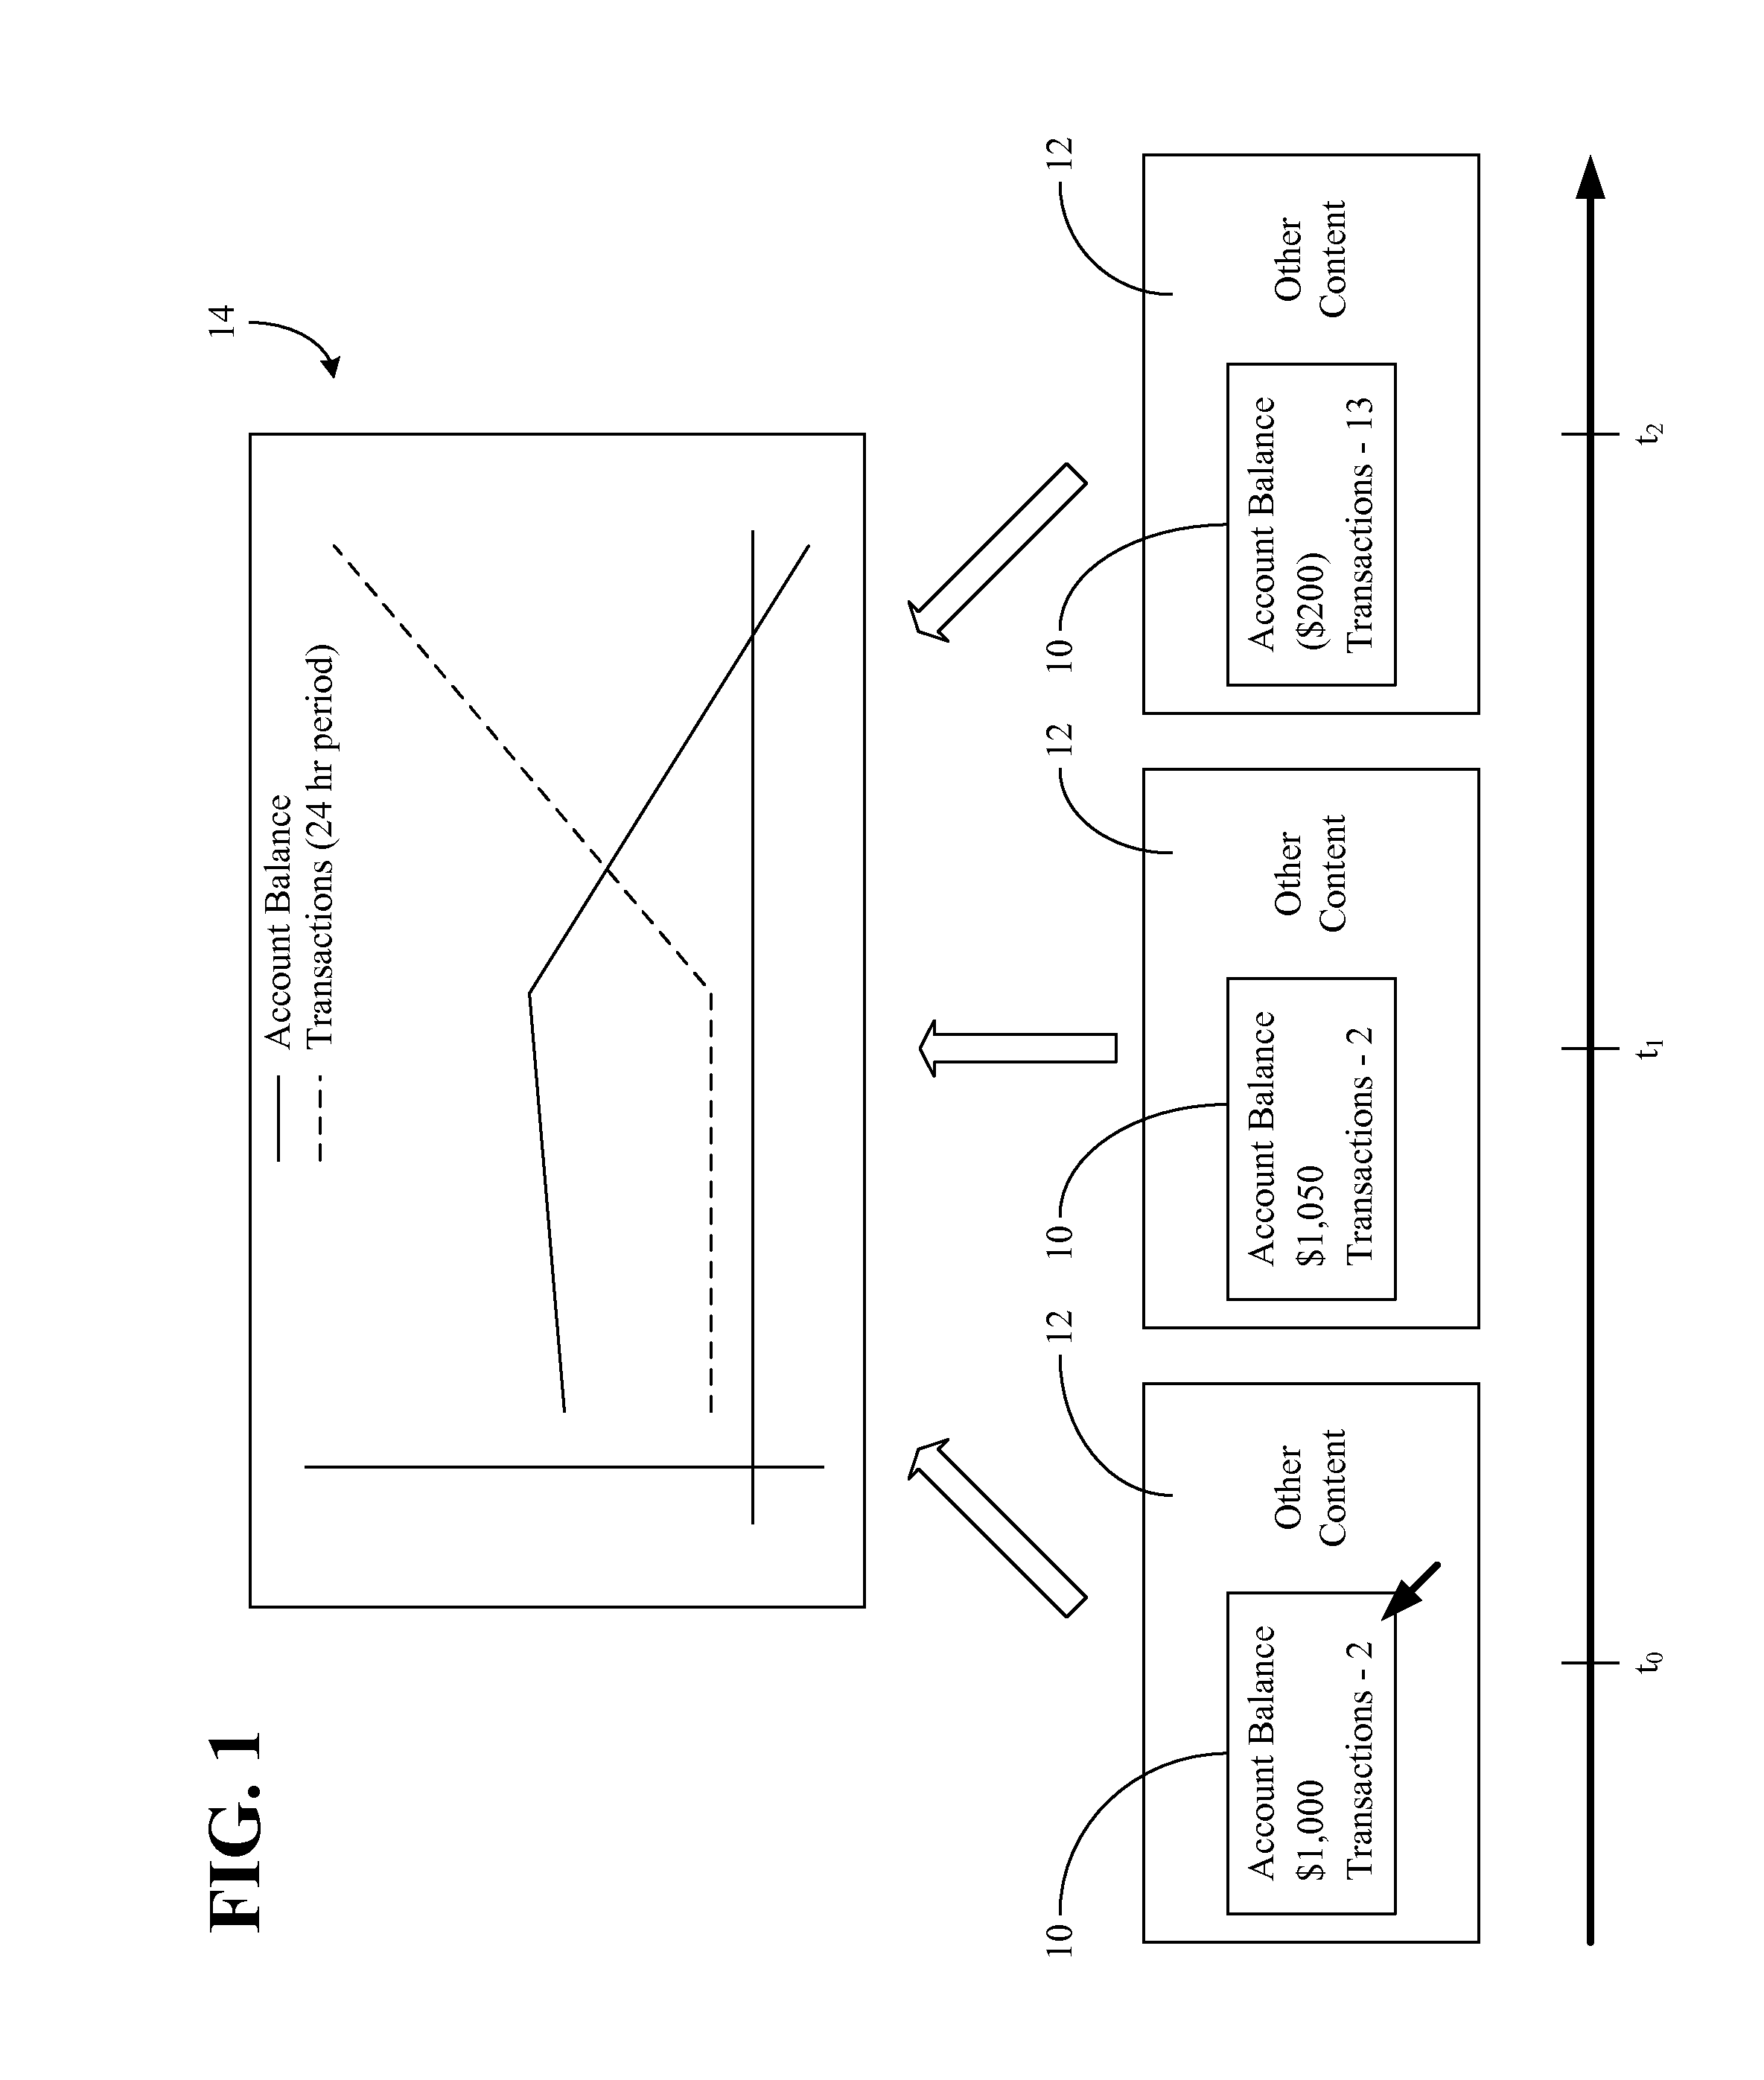 Displaying quantitative trending of pegged data from cache